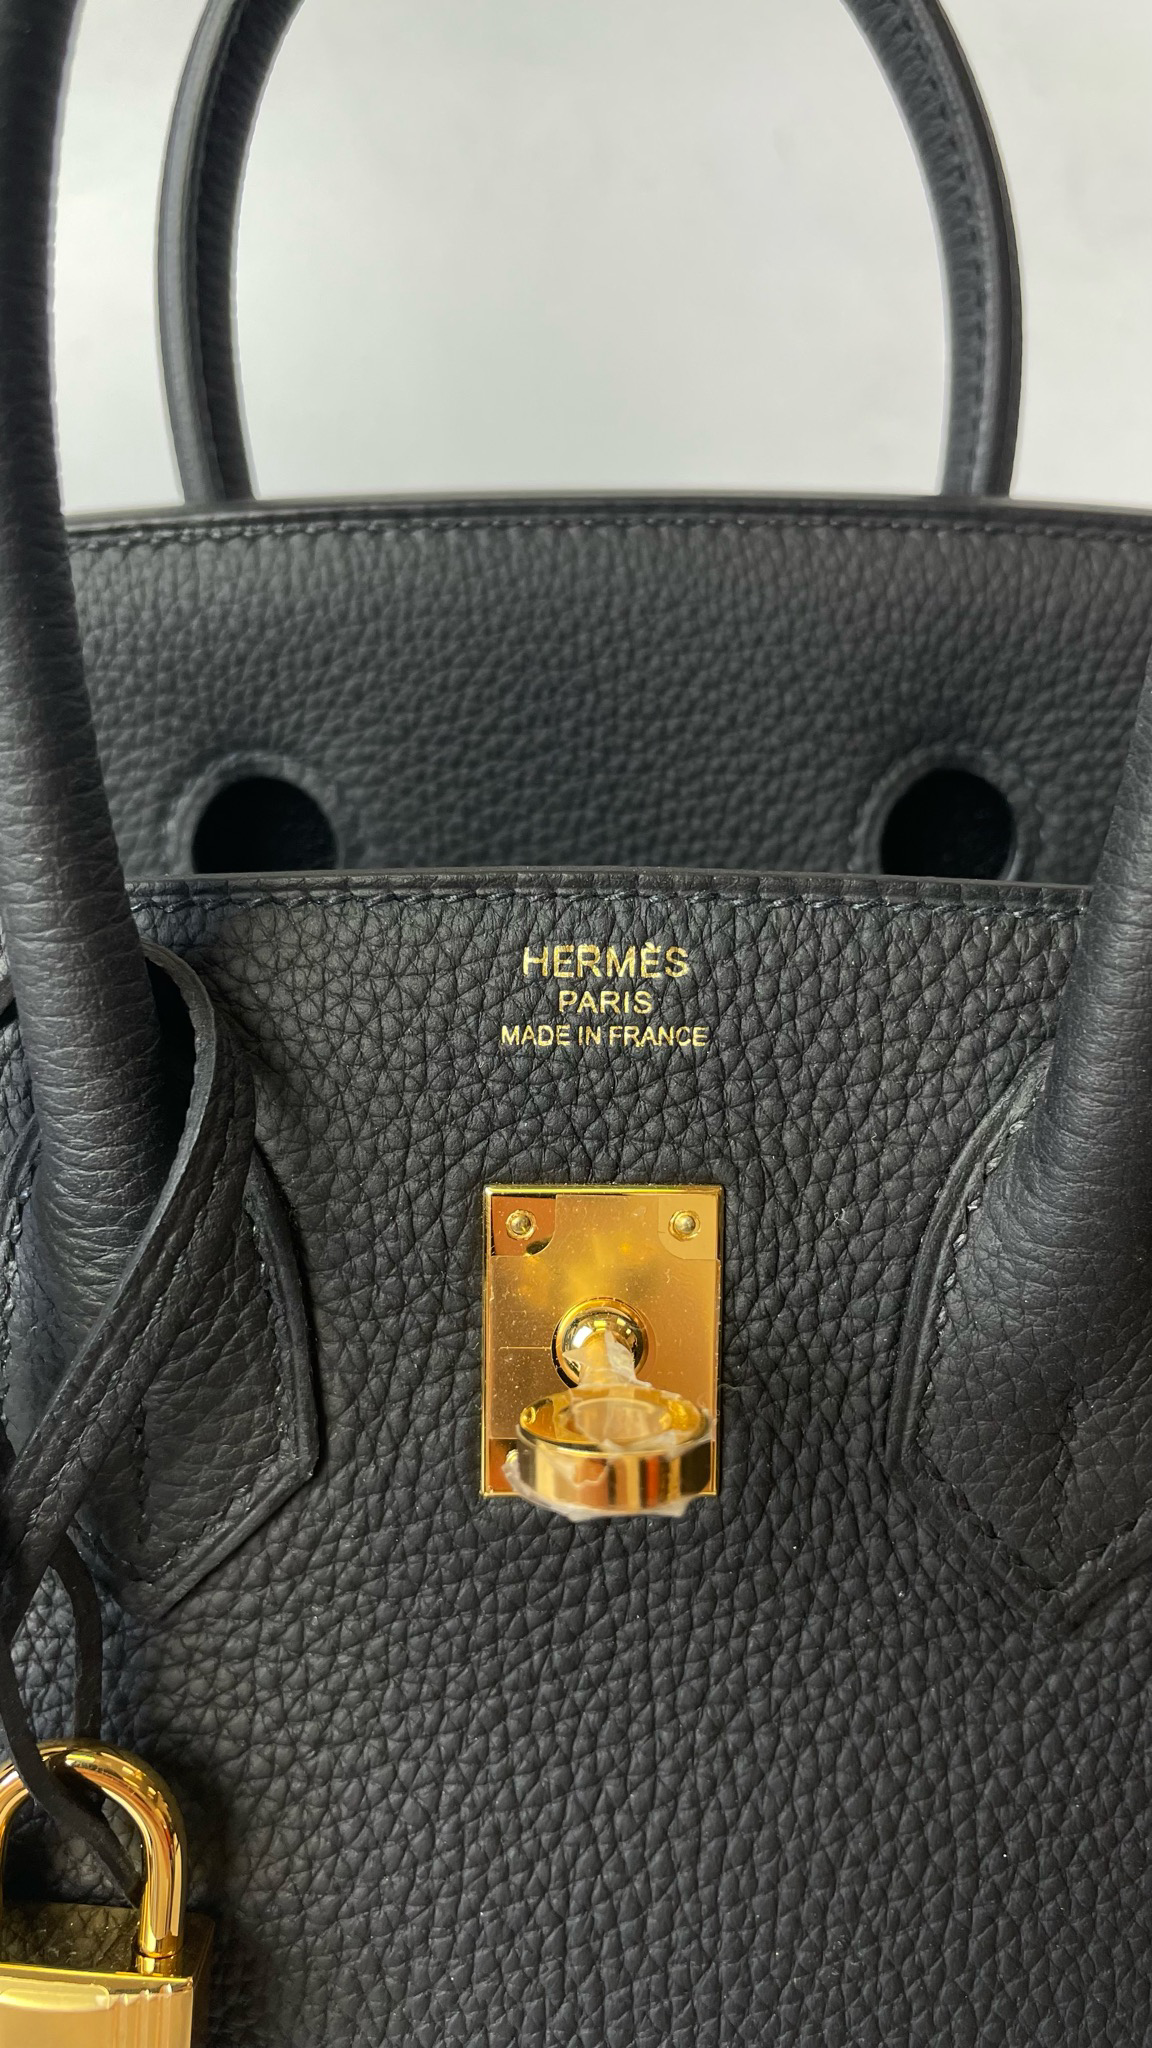 Hermes Chai Birkin 30cm Togo GHW – Consign of the Times ™